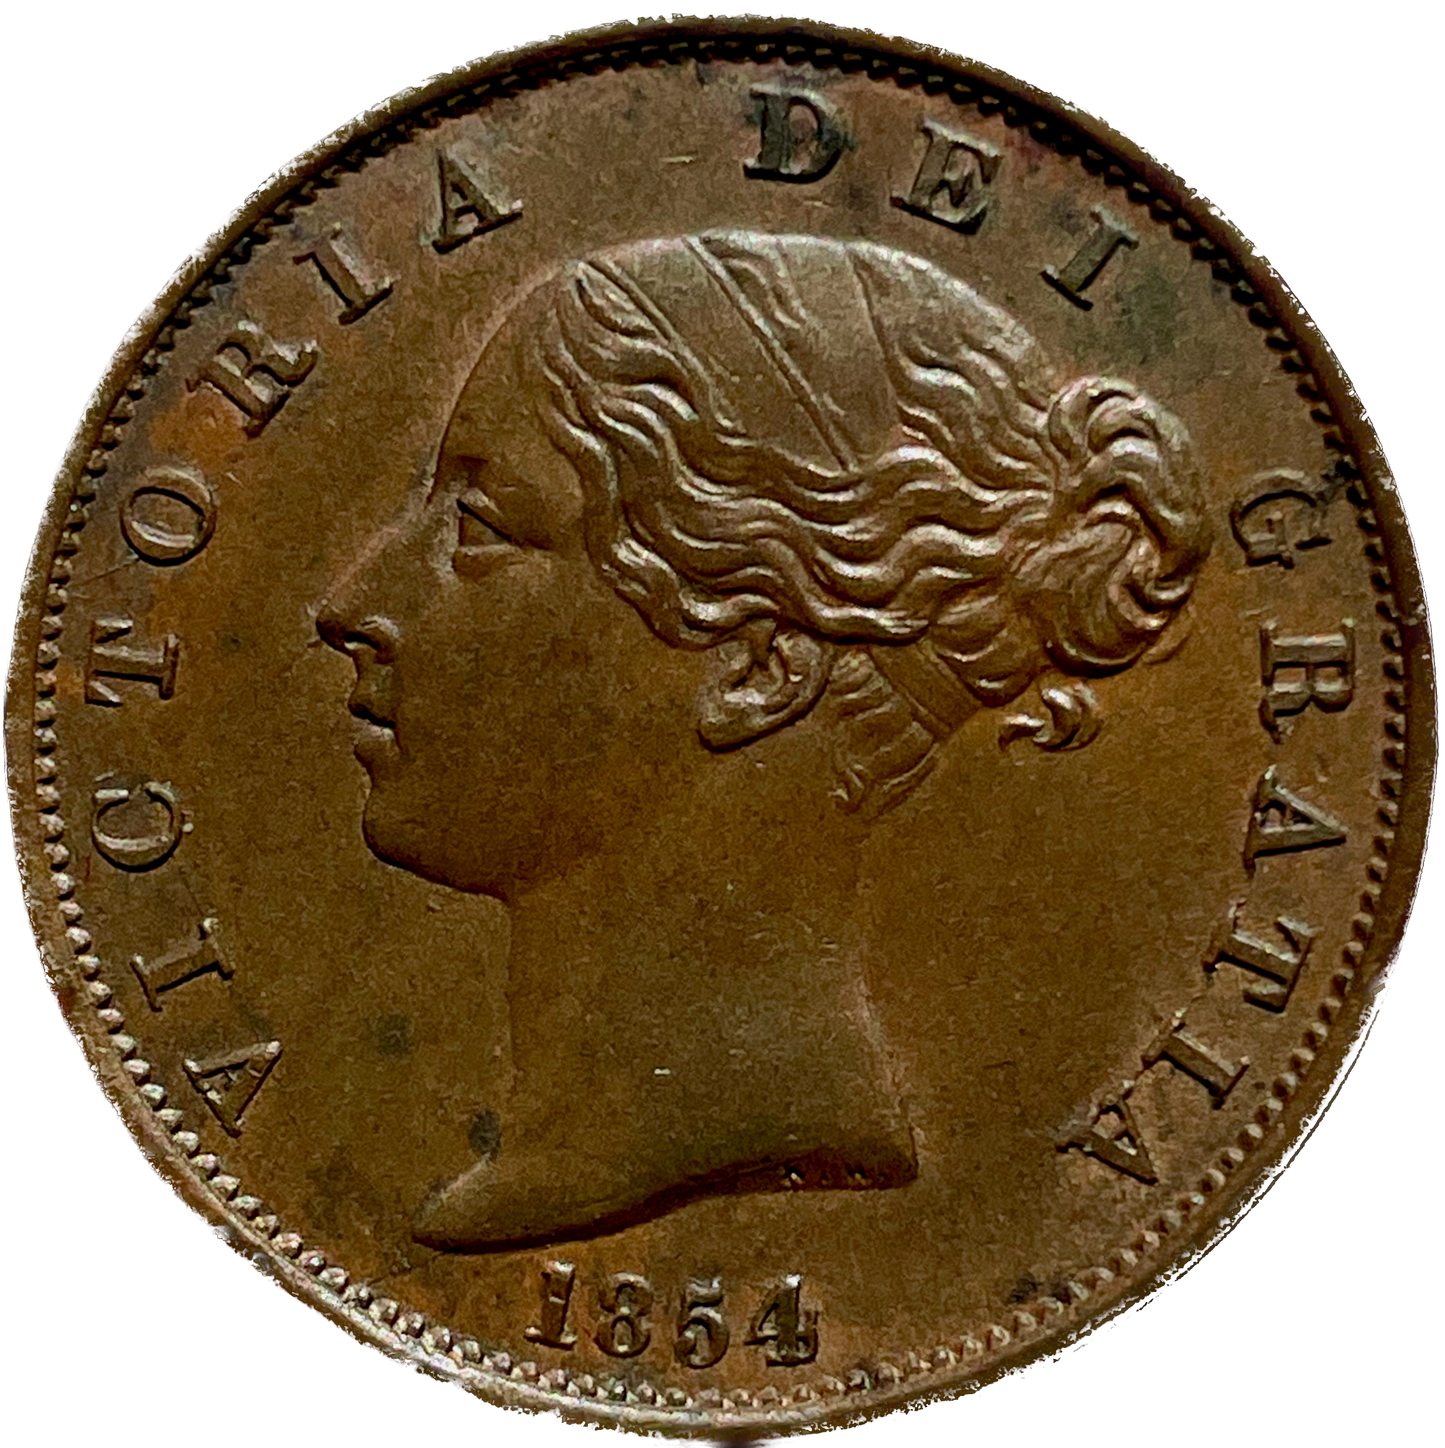 1854 Halfpenny S3949 BMC 1542 Upturned A for V in VICTORIA GEF